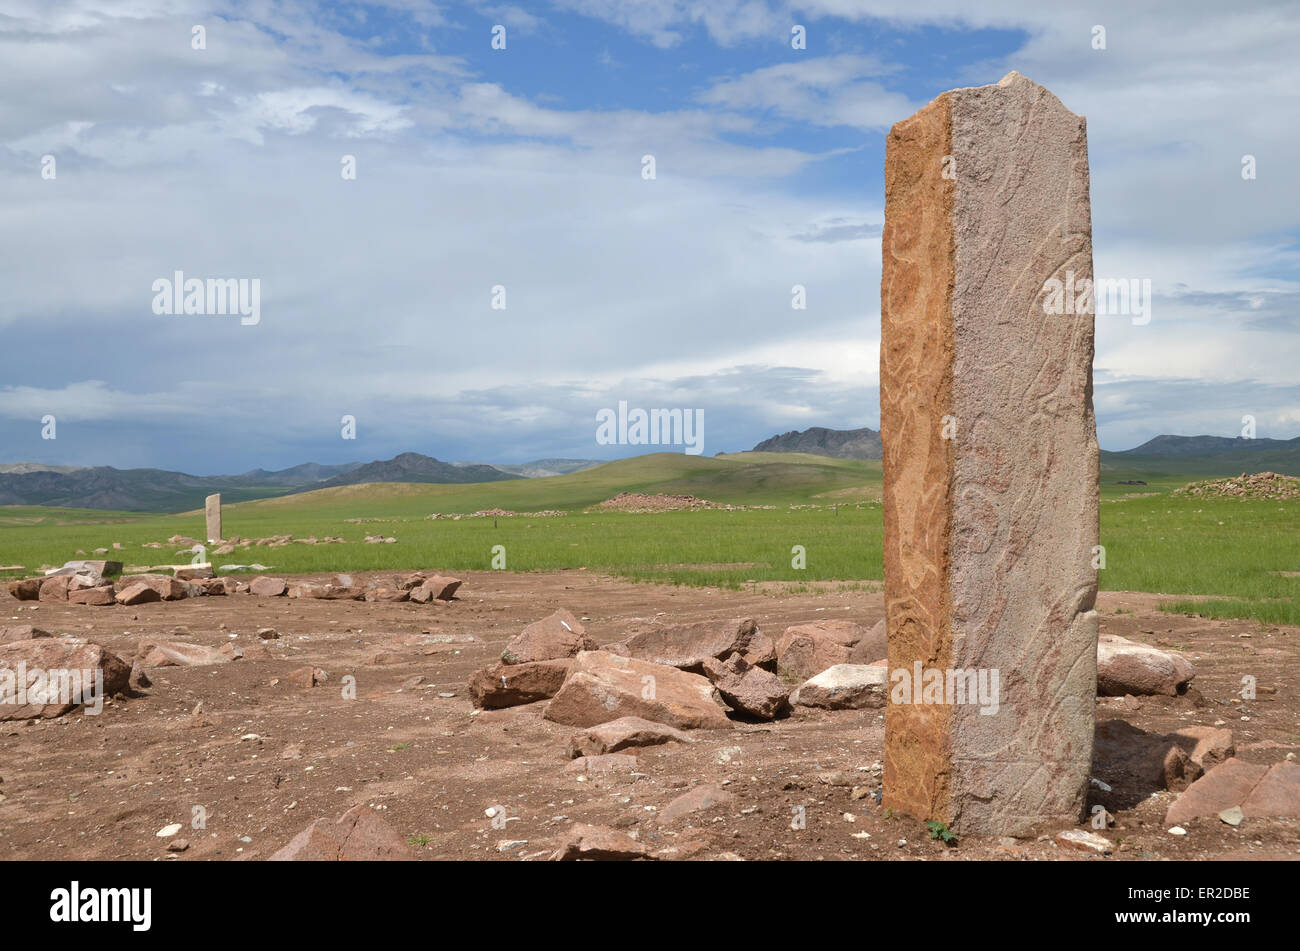 Burial mounds and deer stones near the city of Moron, Ovsgol province, northern Mongolia. Stock Photo